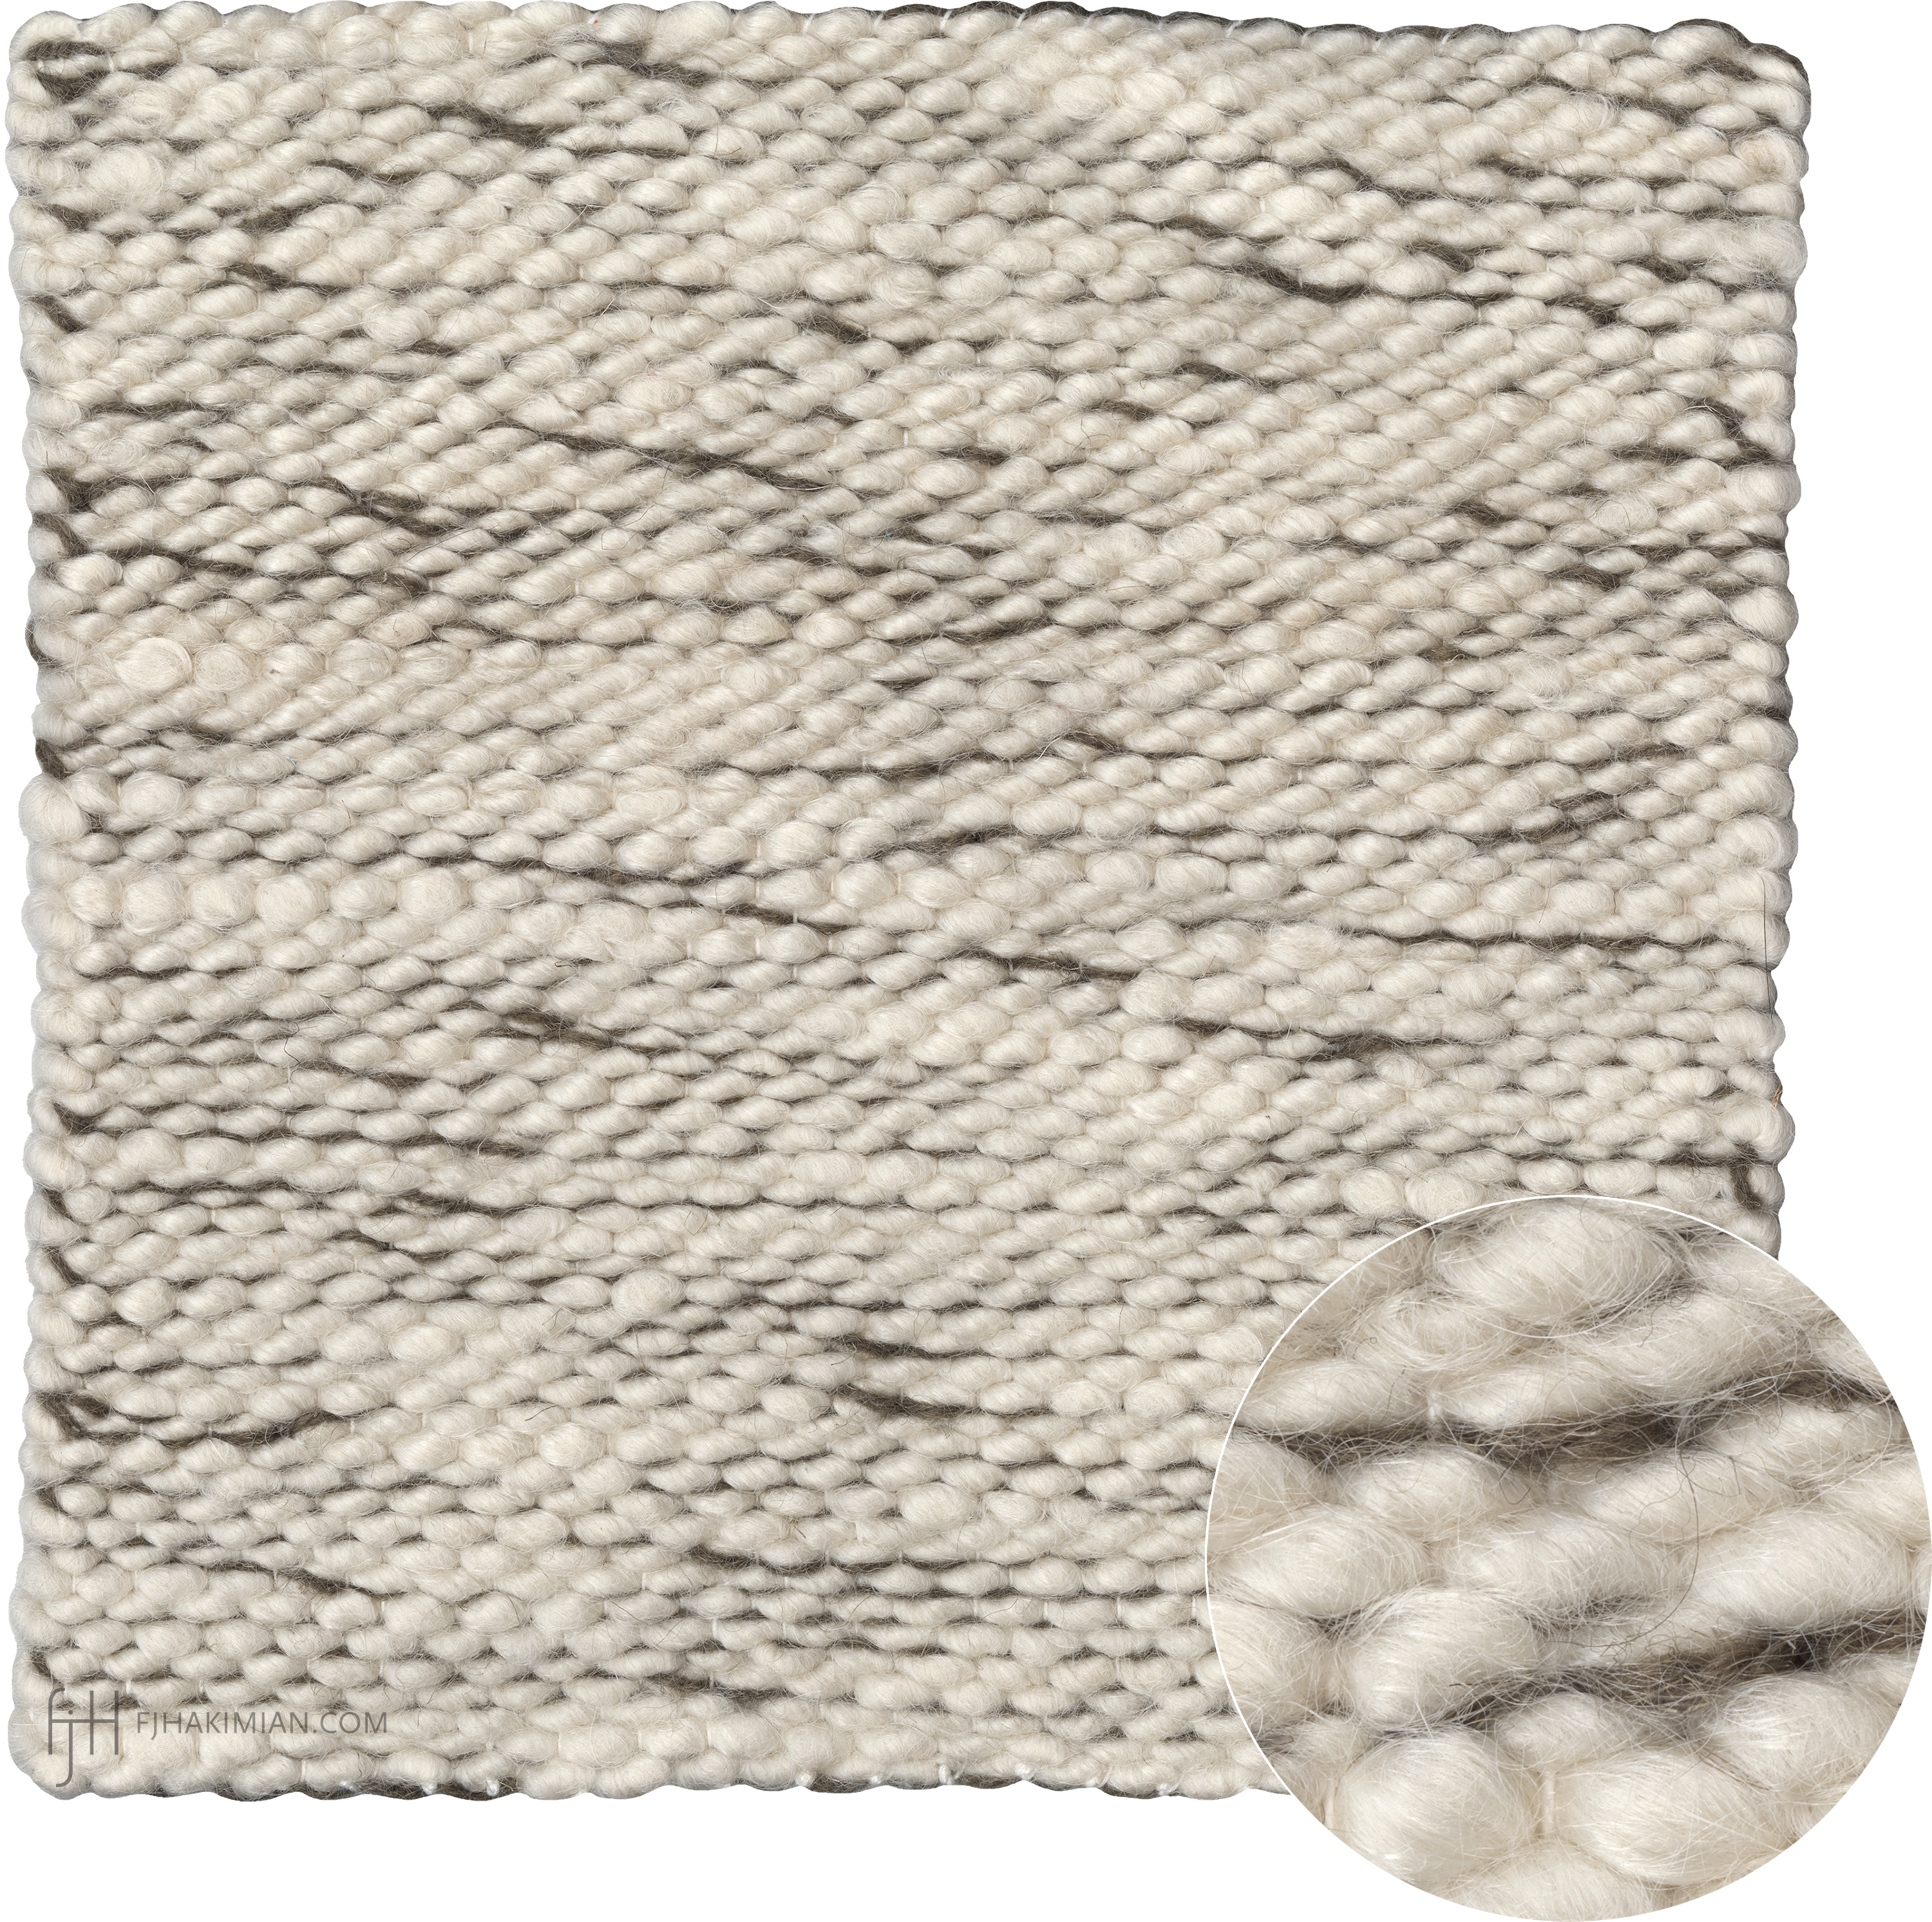 #57207-SW-Mohair-WhiteMohair_with_BrwnWoolAccents-FJ_Hakimian